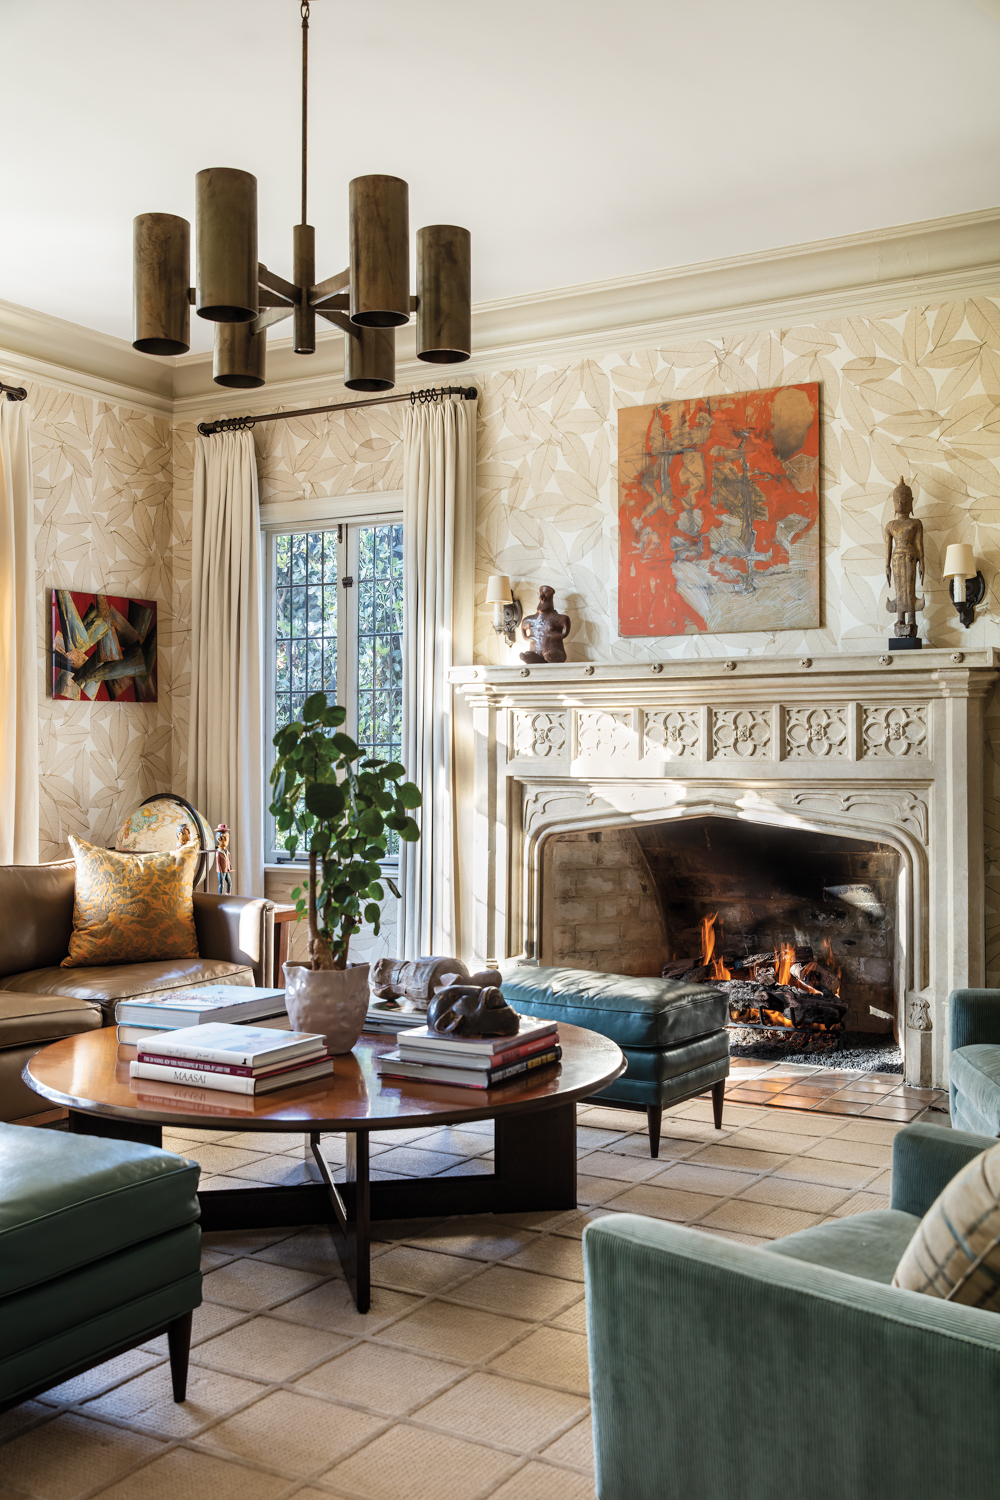 Tour A Historic Tudor-Style Gem That Stuns With Playful 1920s Vibes